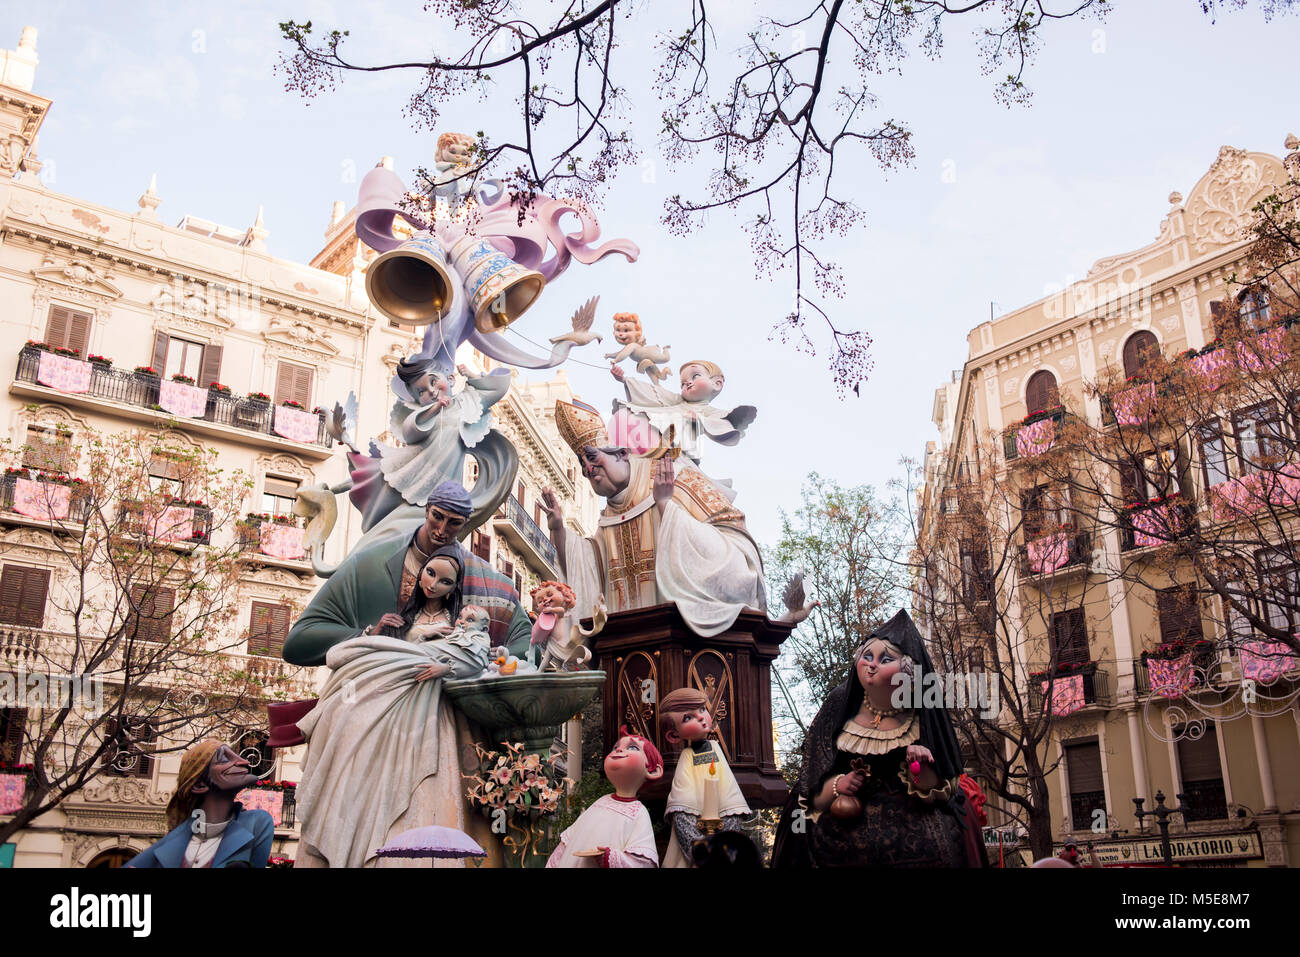 A Falla sculpture display on a city square during the annual 'Las Fallas' Festival taking place in Valencia, Spain. Stock Photo